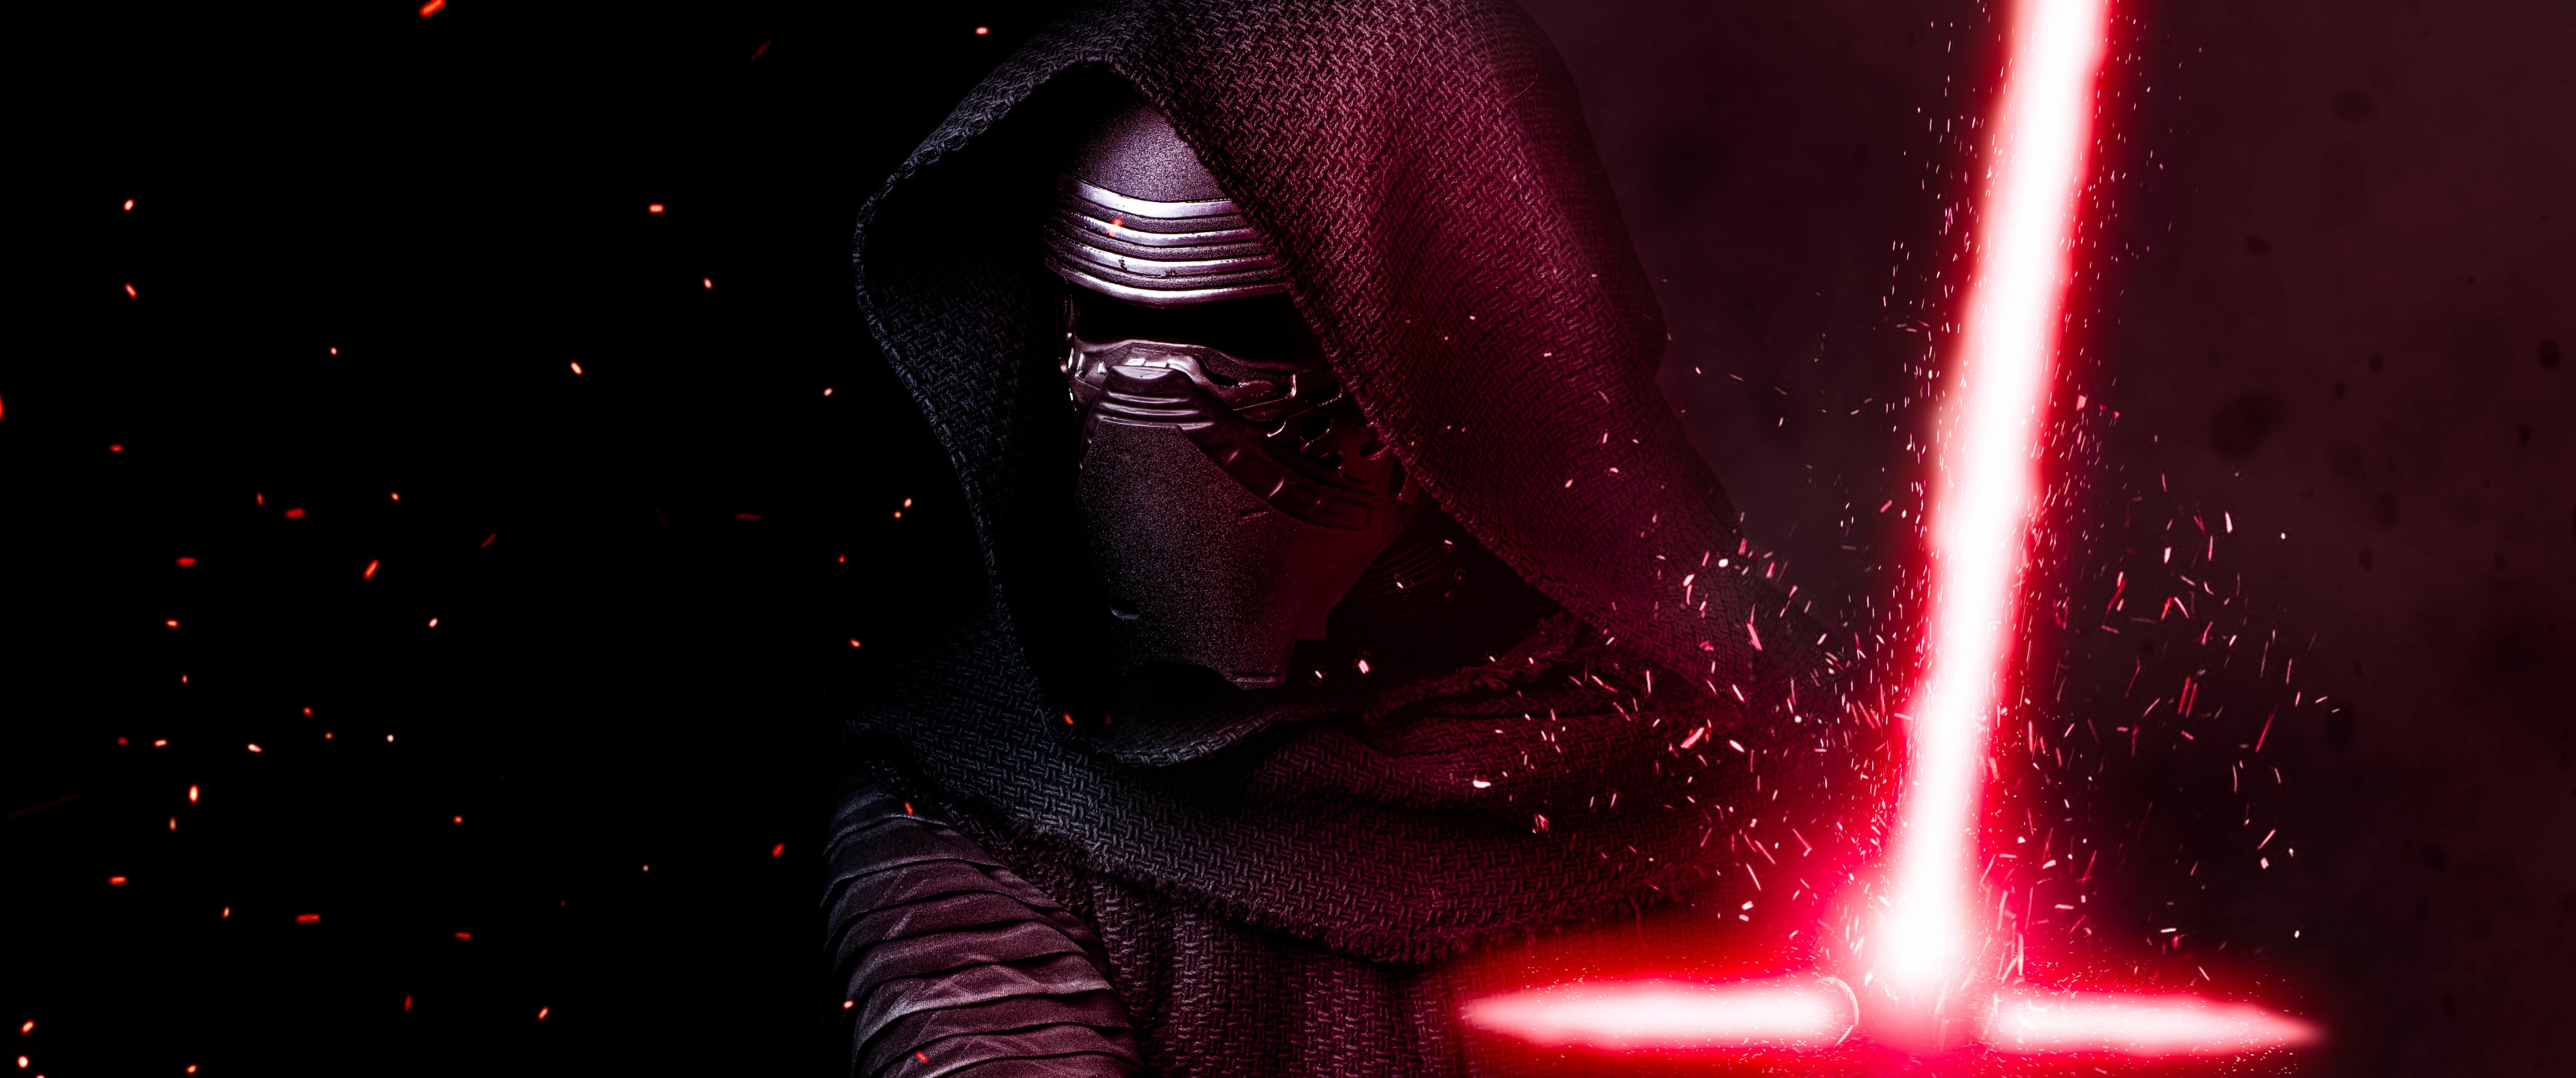 Kylo Ren Star Wars 7 Full HD Wallpaper  Gallery Yopriceville   HighQuality Free Images and Transparent PNG Clipart